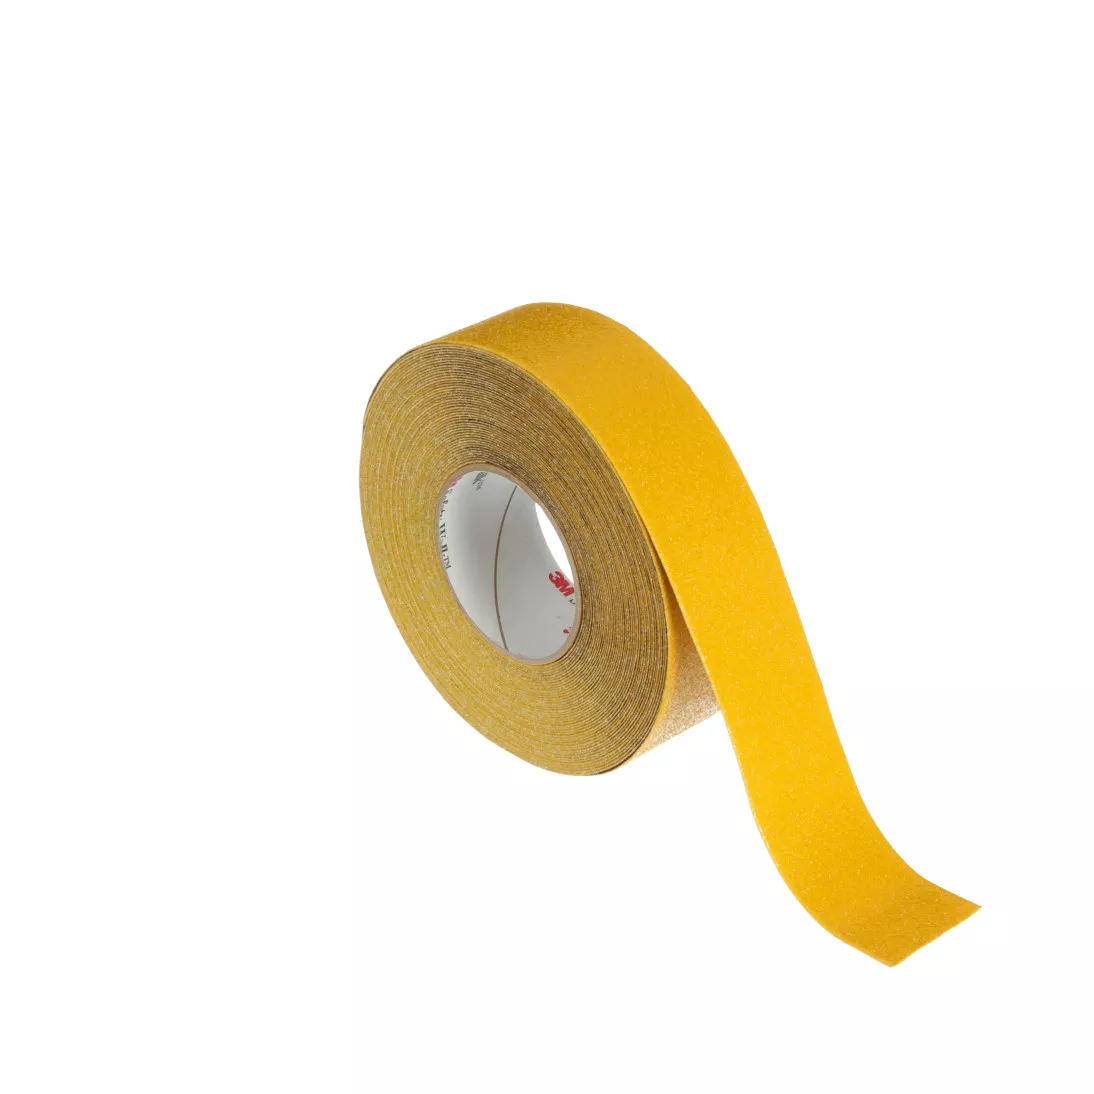 3M™ Safety-Walk™ Slip-Resistant Conformable Tapes & Treads 530, Safety
Yellow, 2 in x 60 ft, Roll, 2/Case